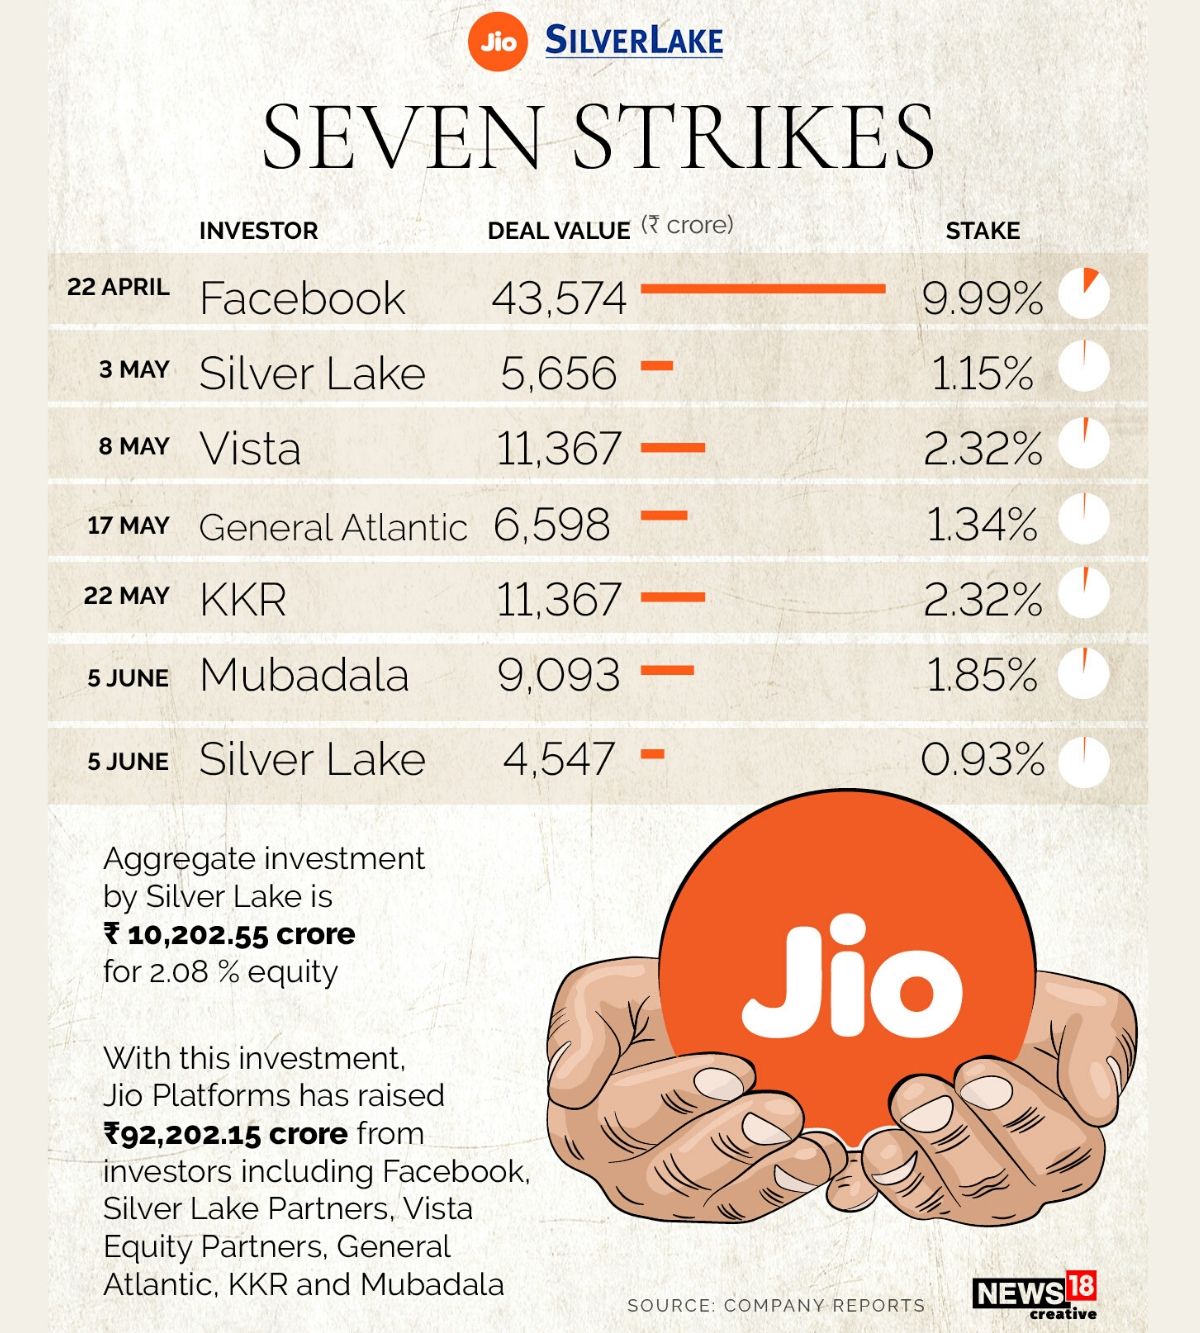 Silver Lake invests another Rs 4,547 crore in Jio Platforms